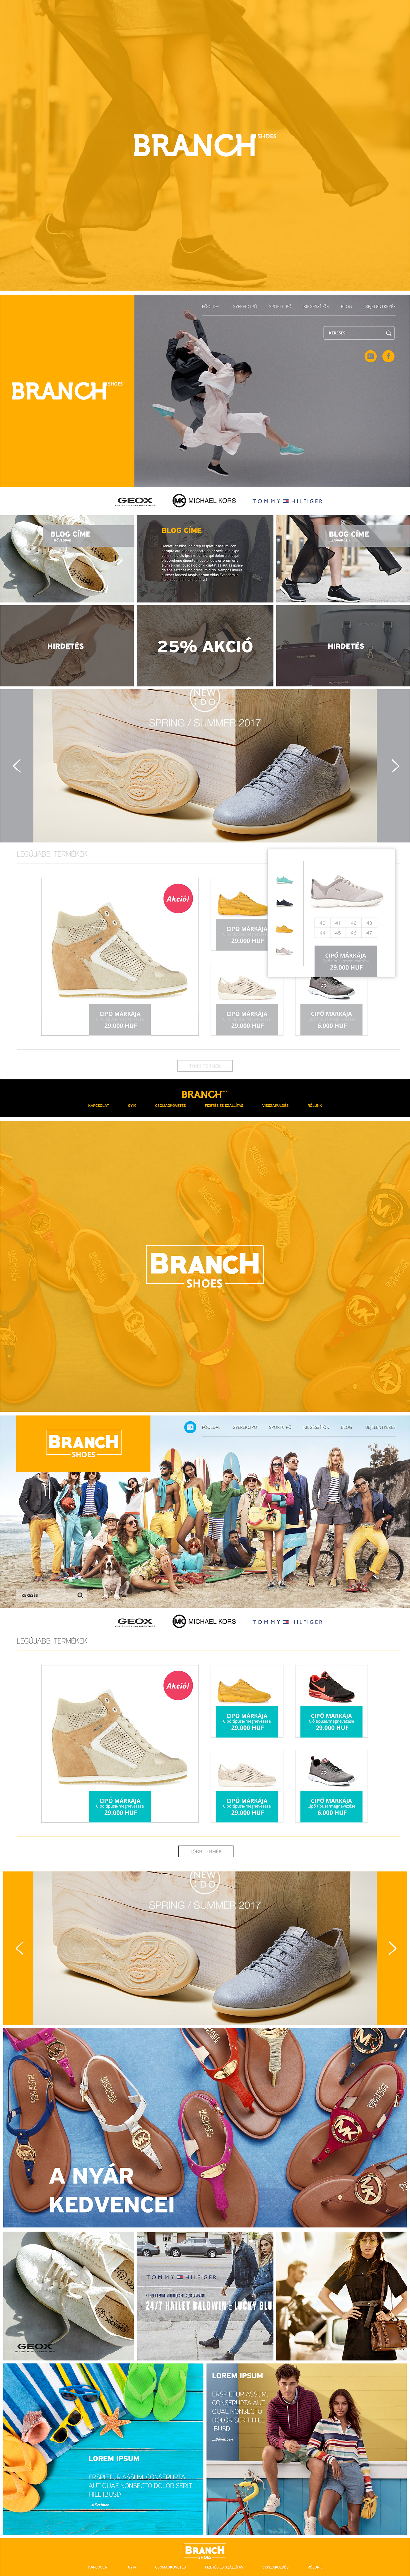 shoes shoe redesign yellow Web identity